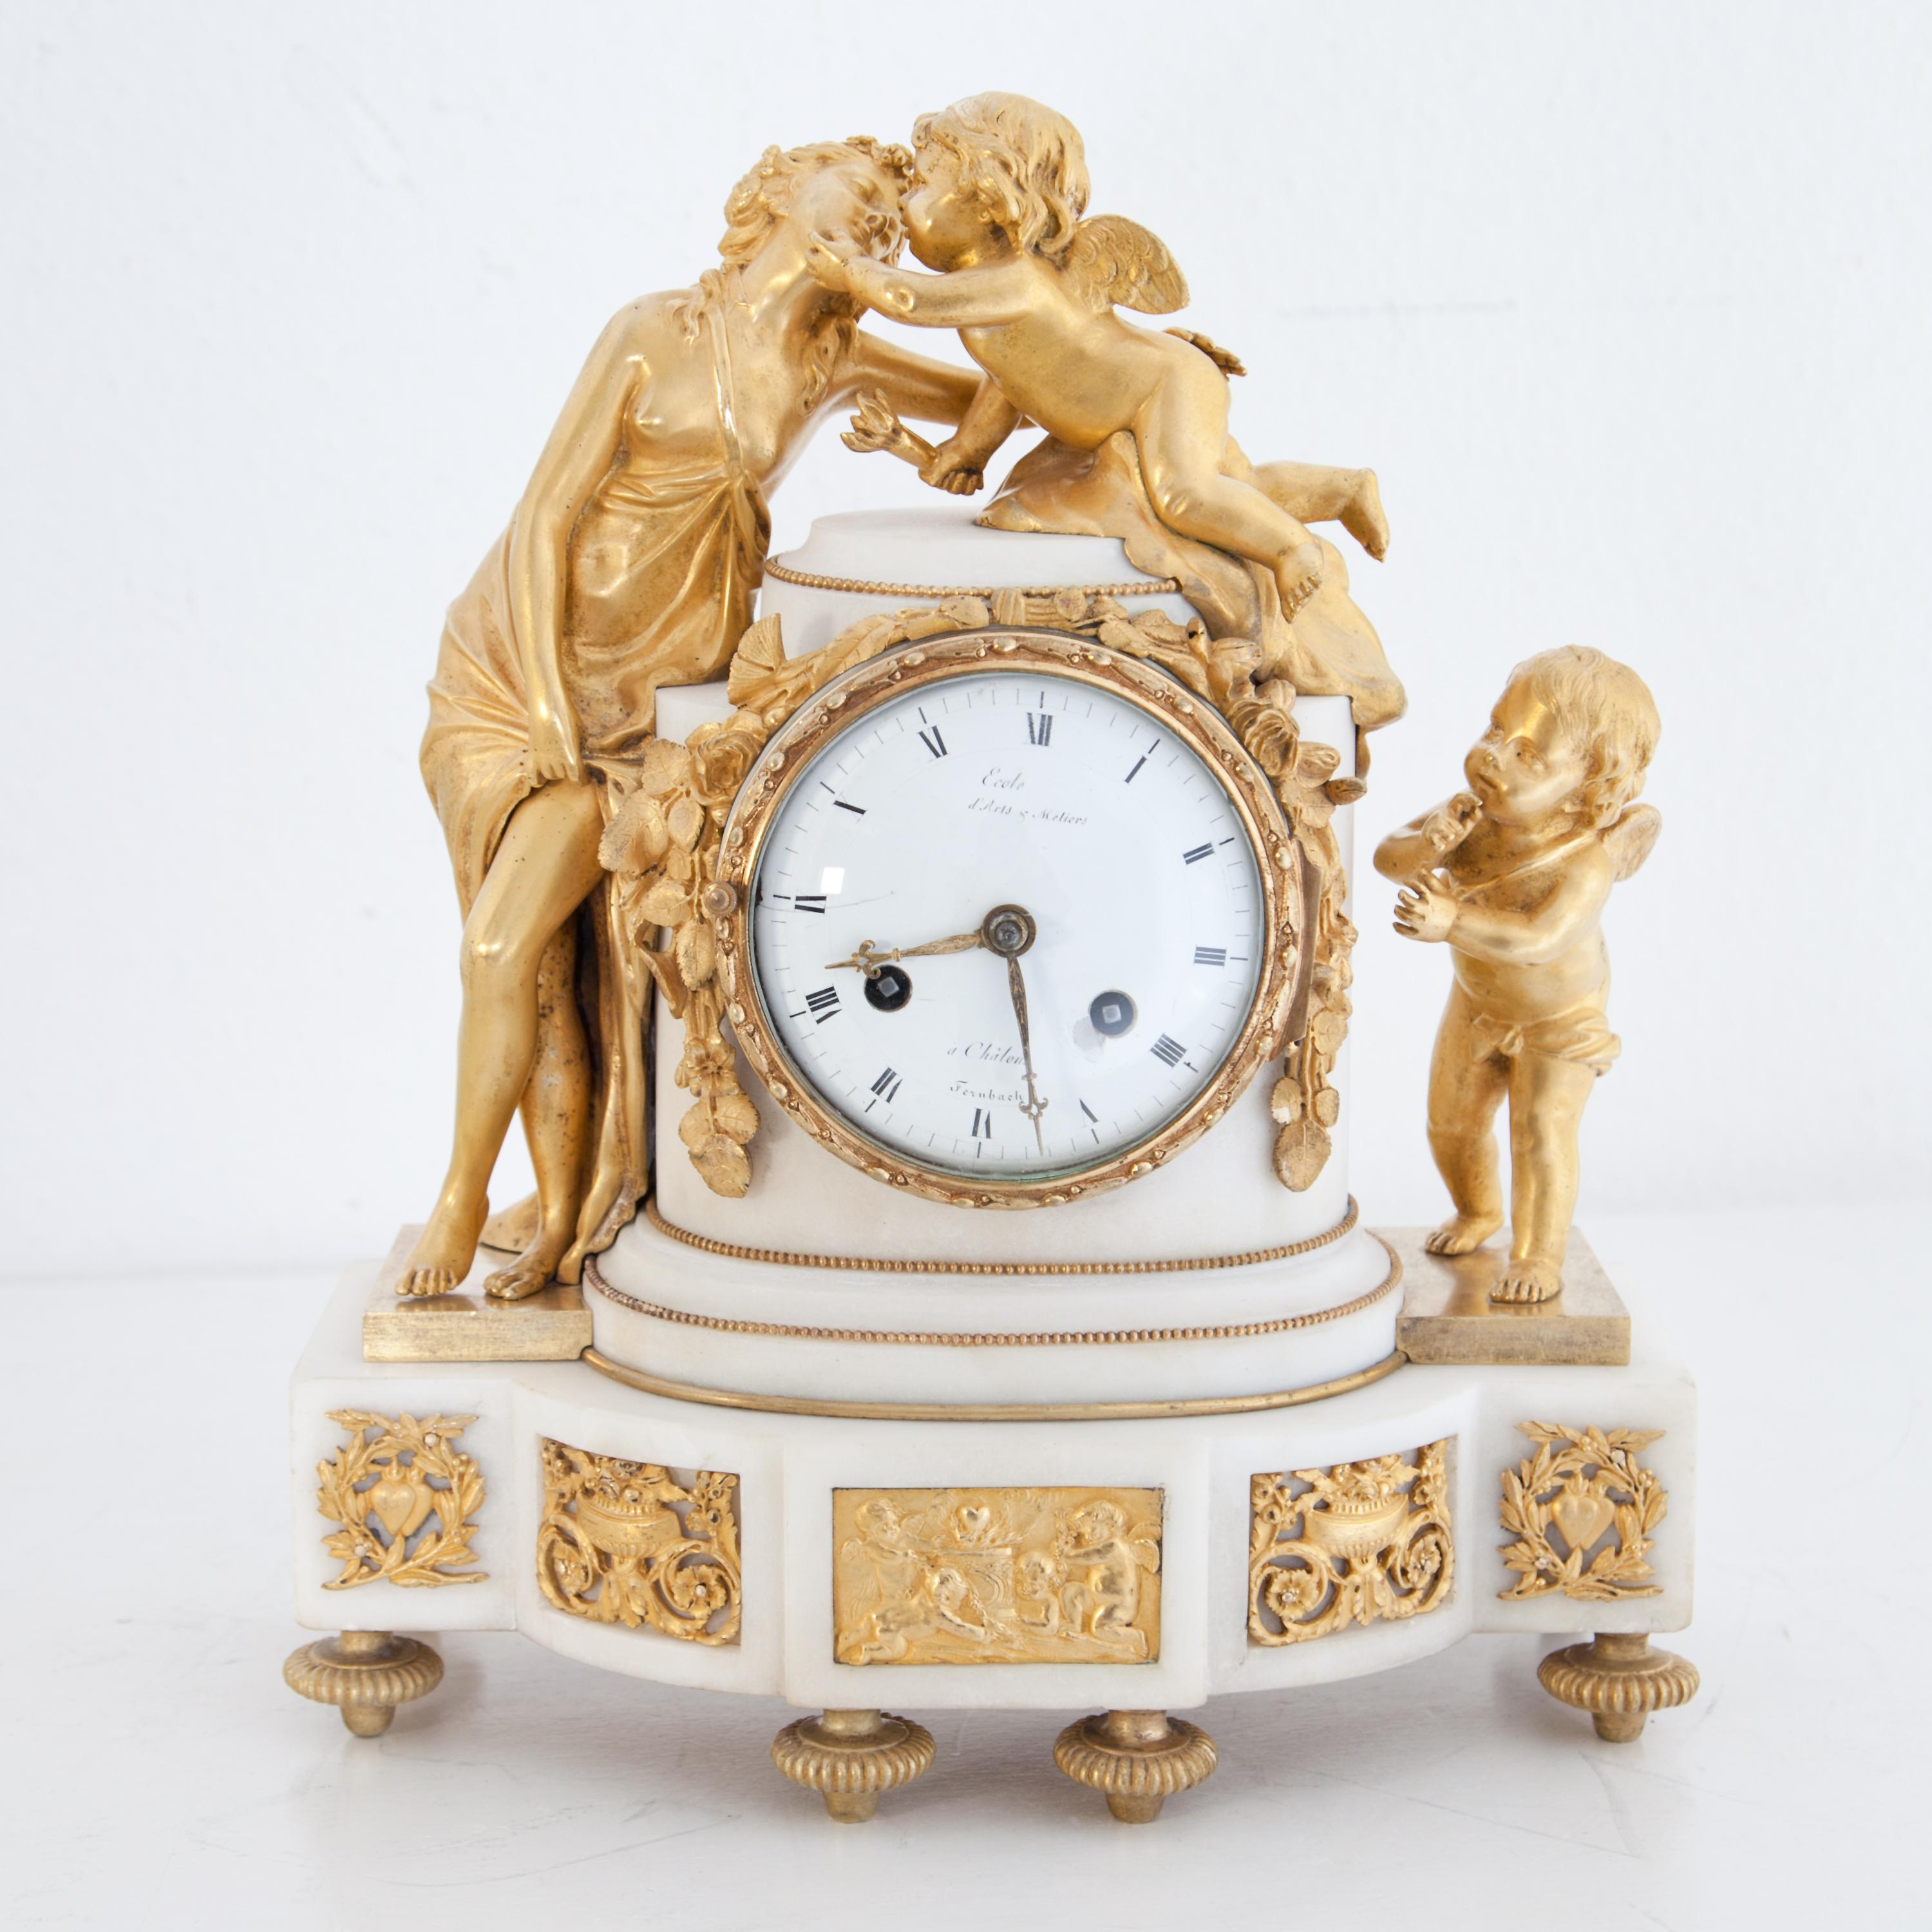 Louis Seize pendule on marble base with stylized column stump and figural fire-gilded bronze decoration depicting Amor and Psyche. The enamel dial and the movement is inscribed 